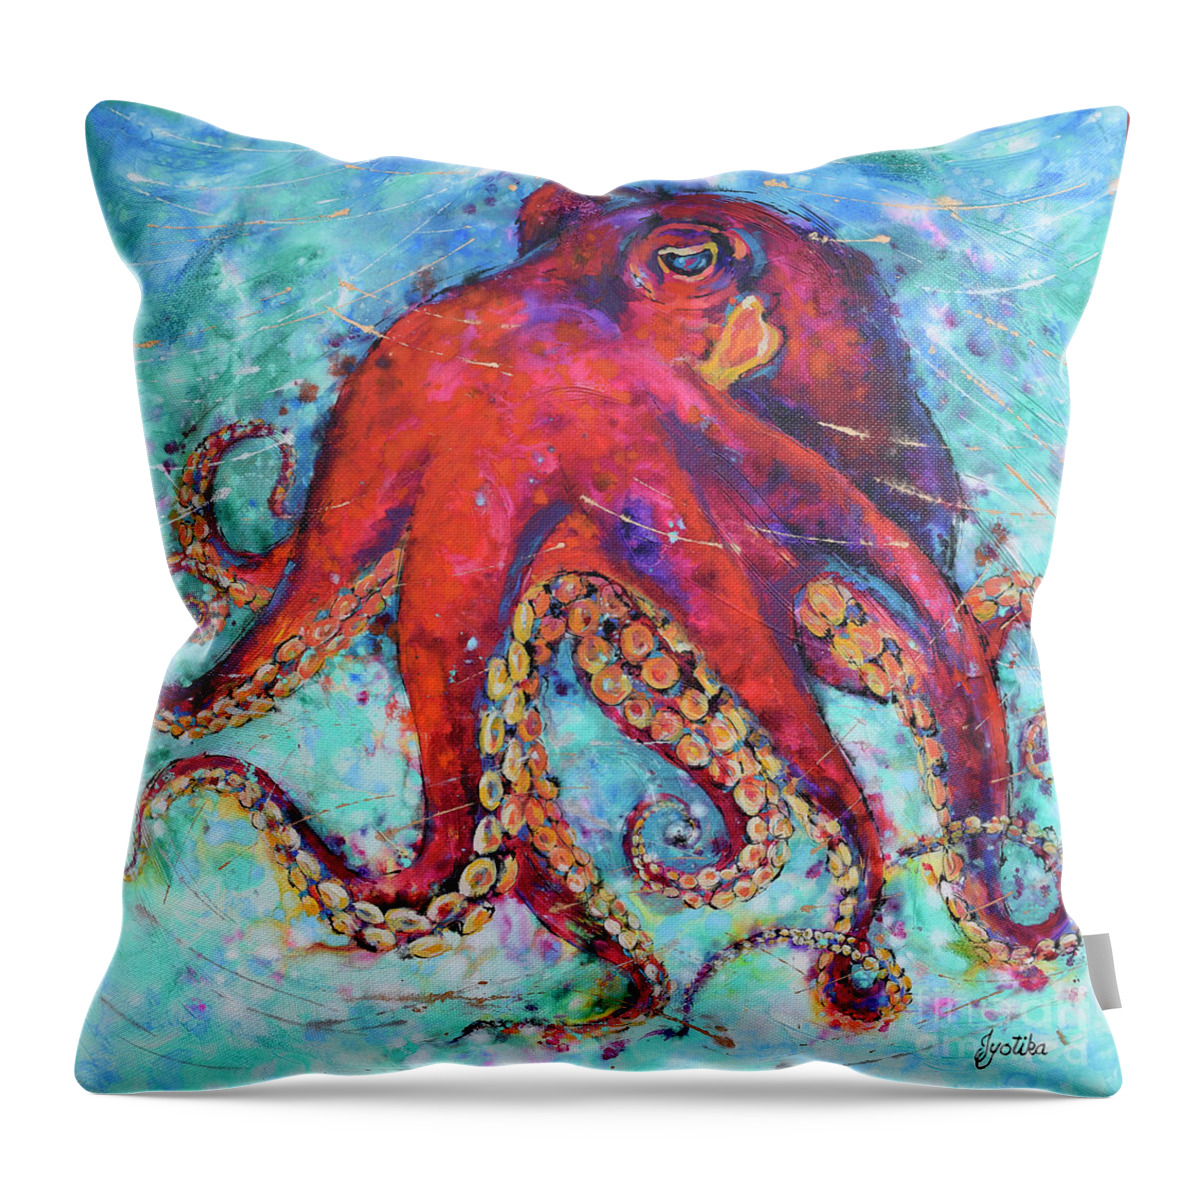 Octopus Throw Pillow featuring the painting Radiant Octopus by Jyotika Shroff